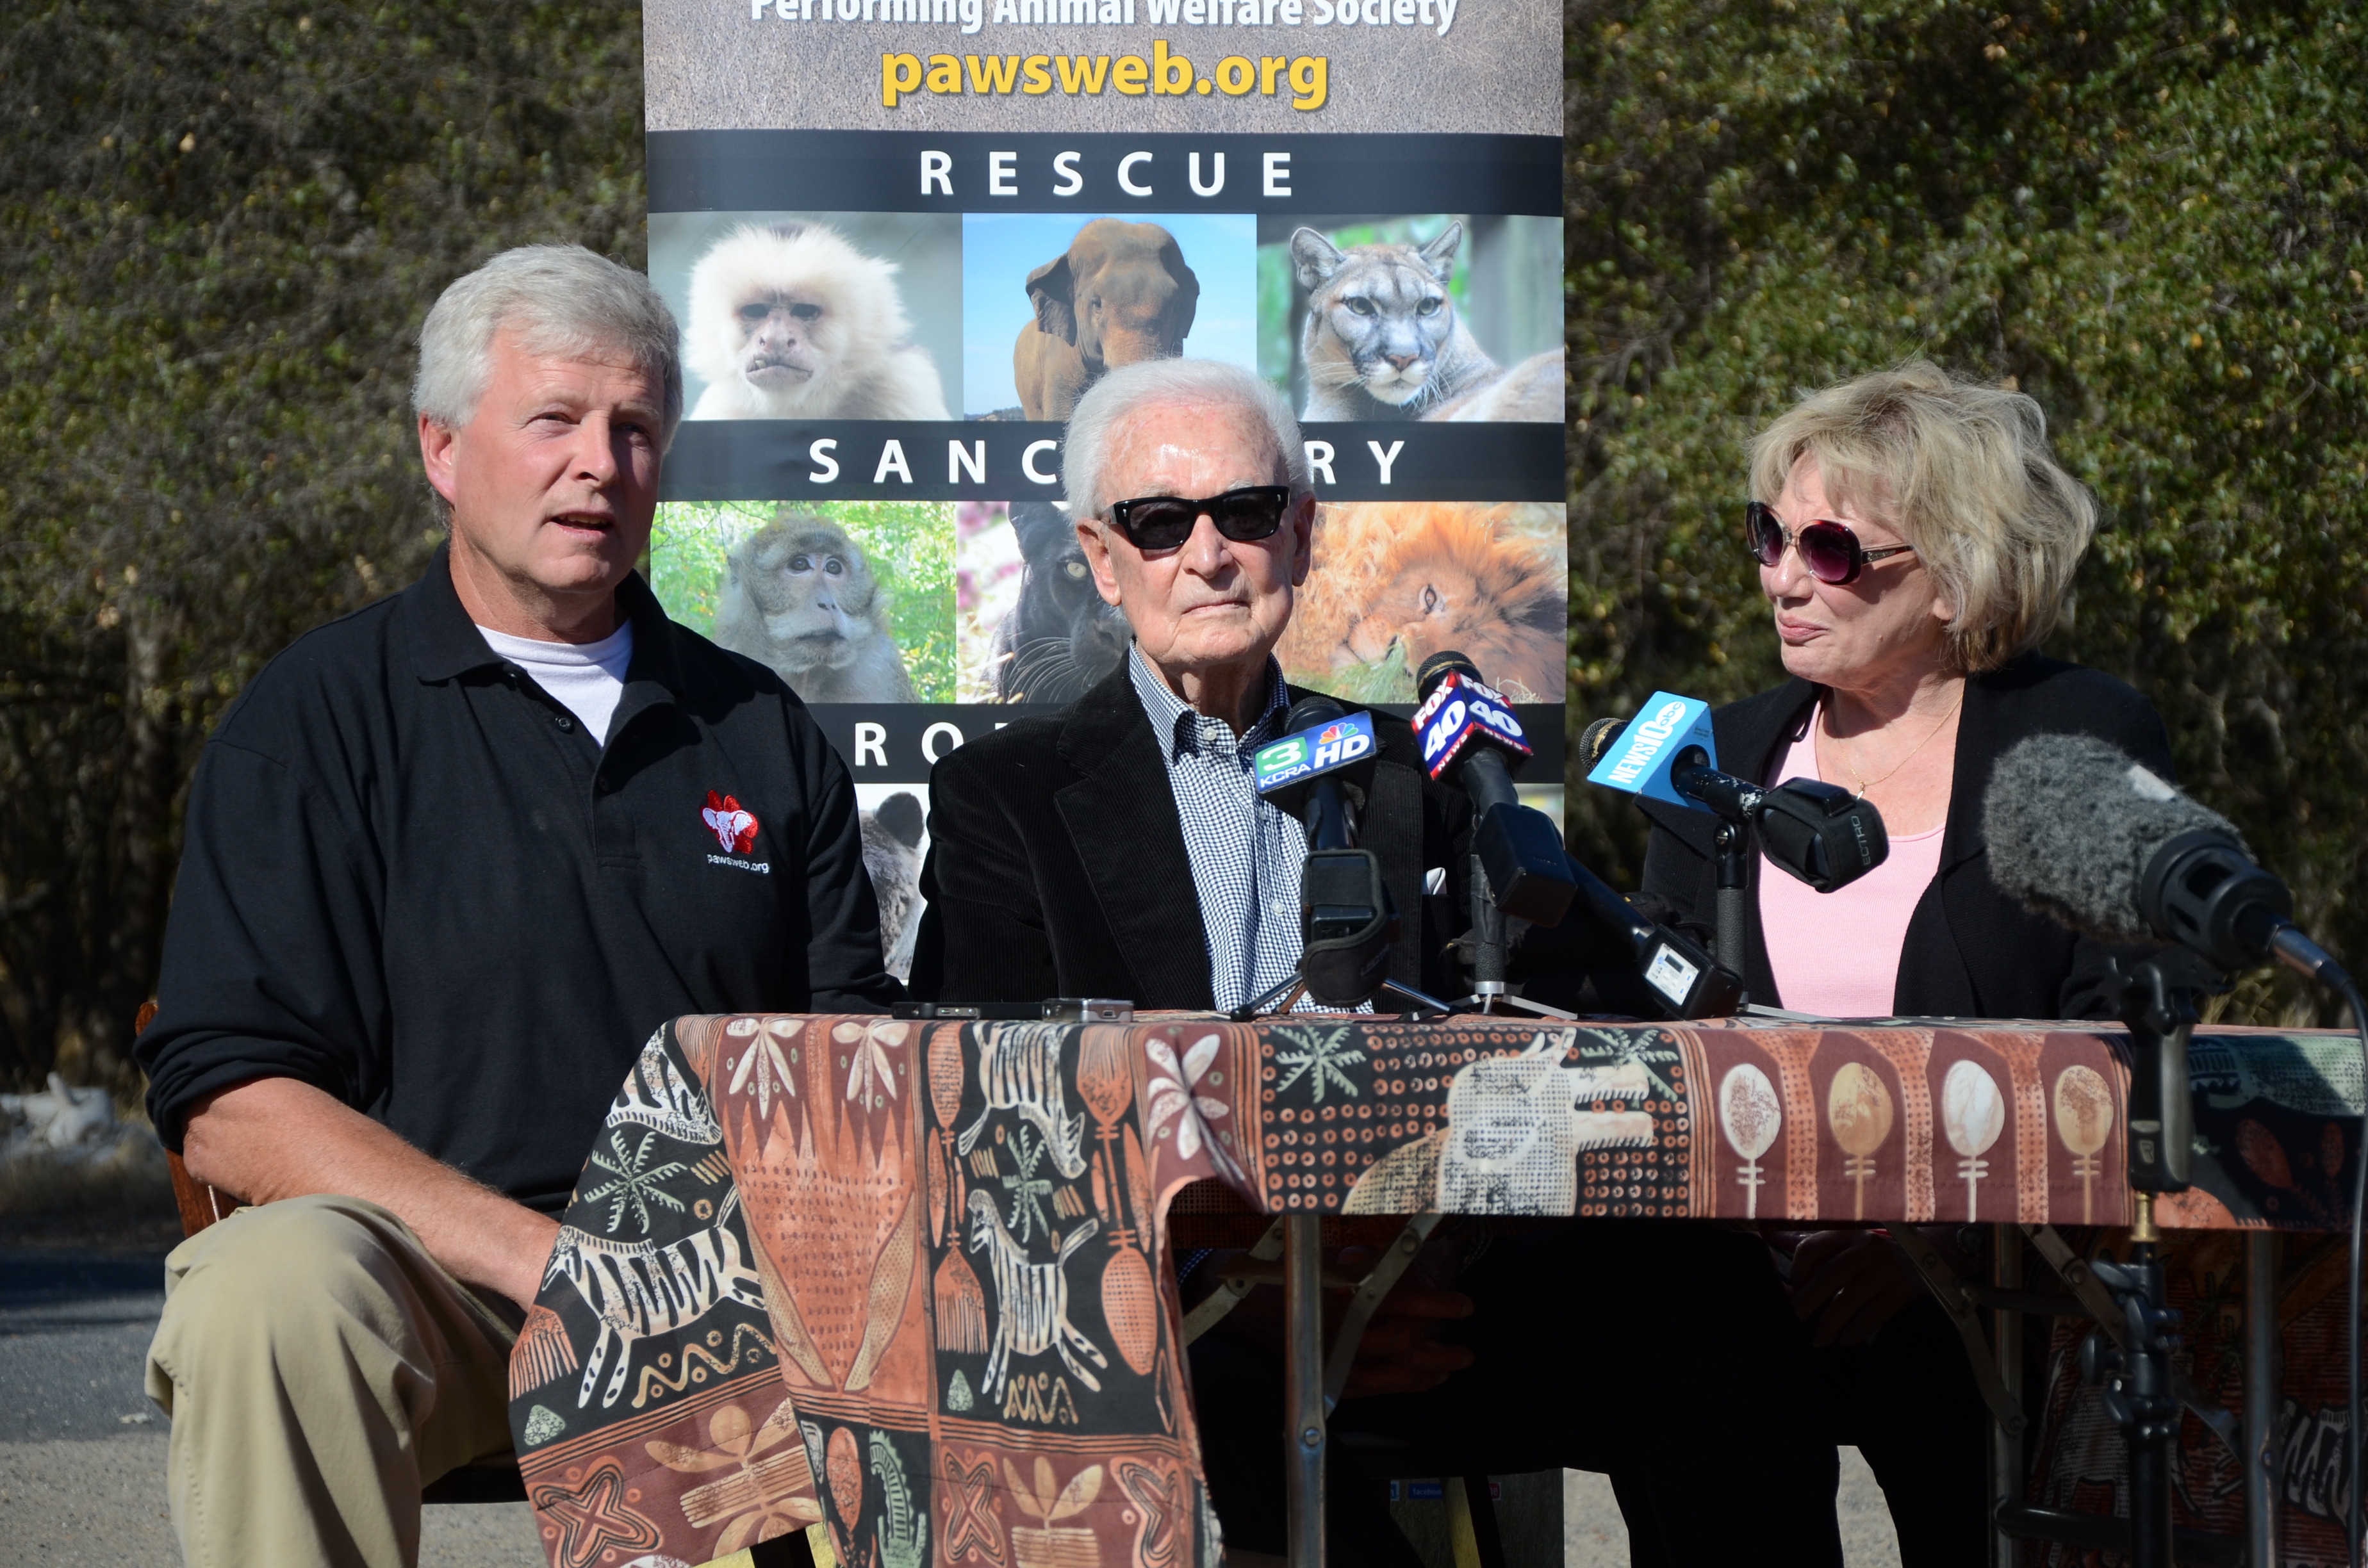 PAWS co-founder Ed Stewart with Bob Barker and Nancy Burnet during a news conference on October 21, 2013 | Source: Getty Images